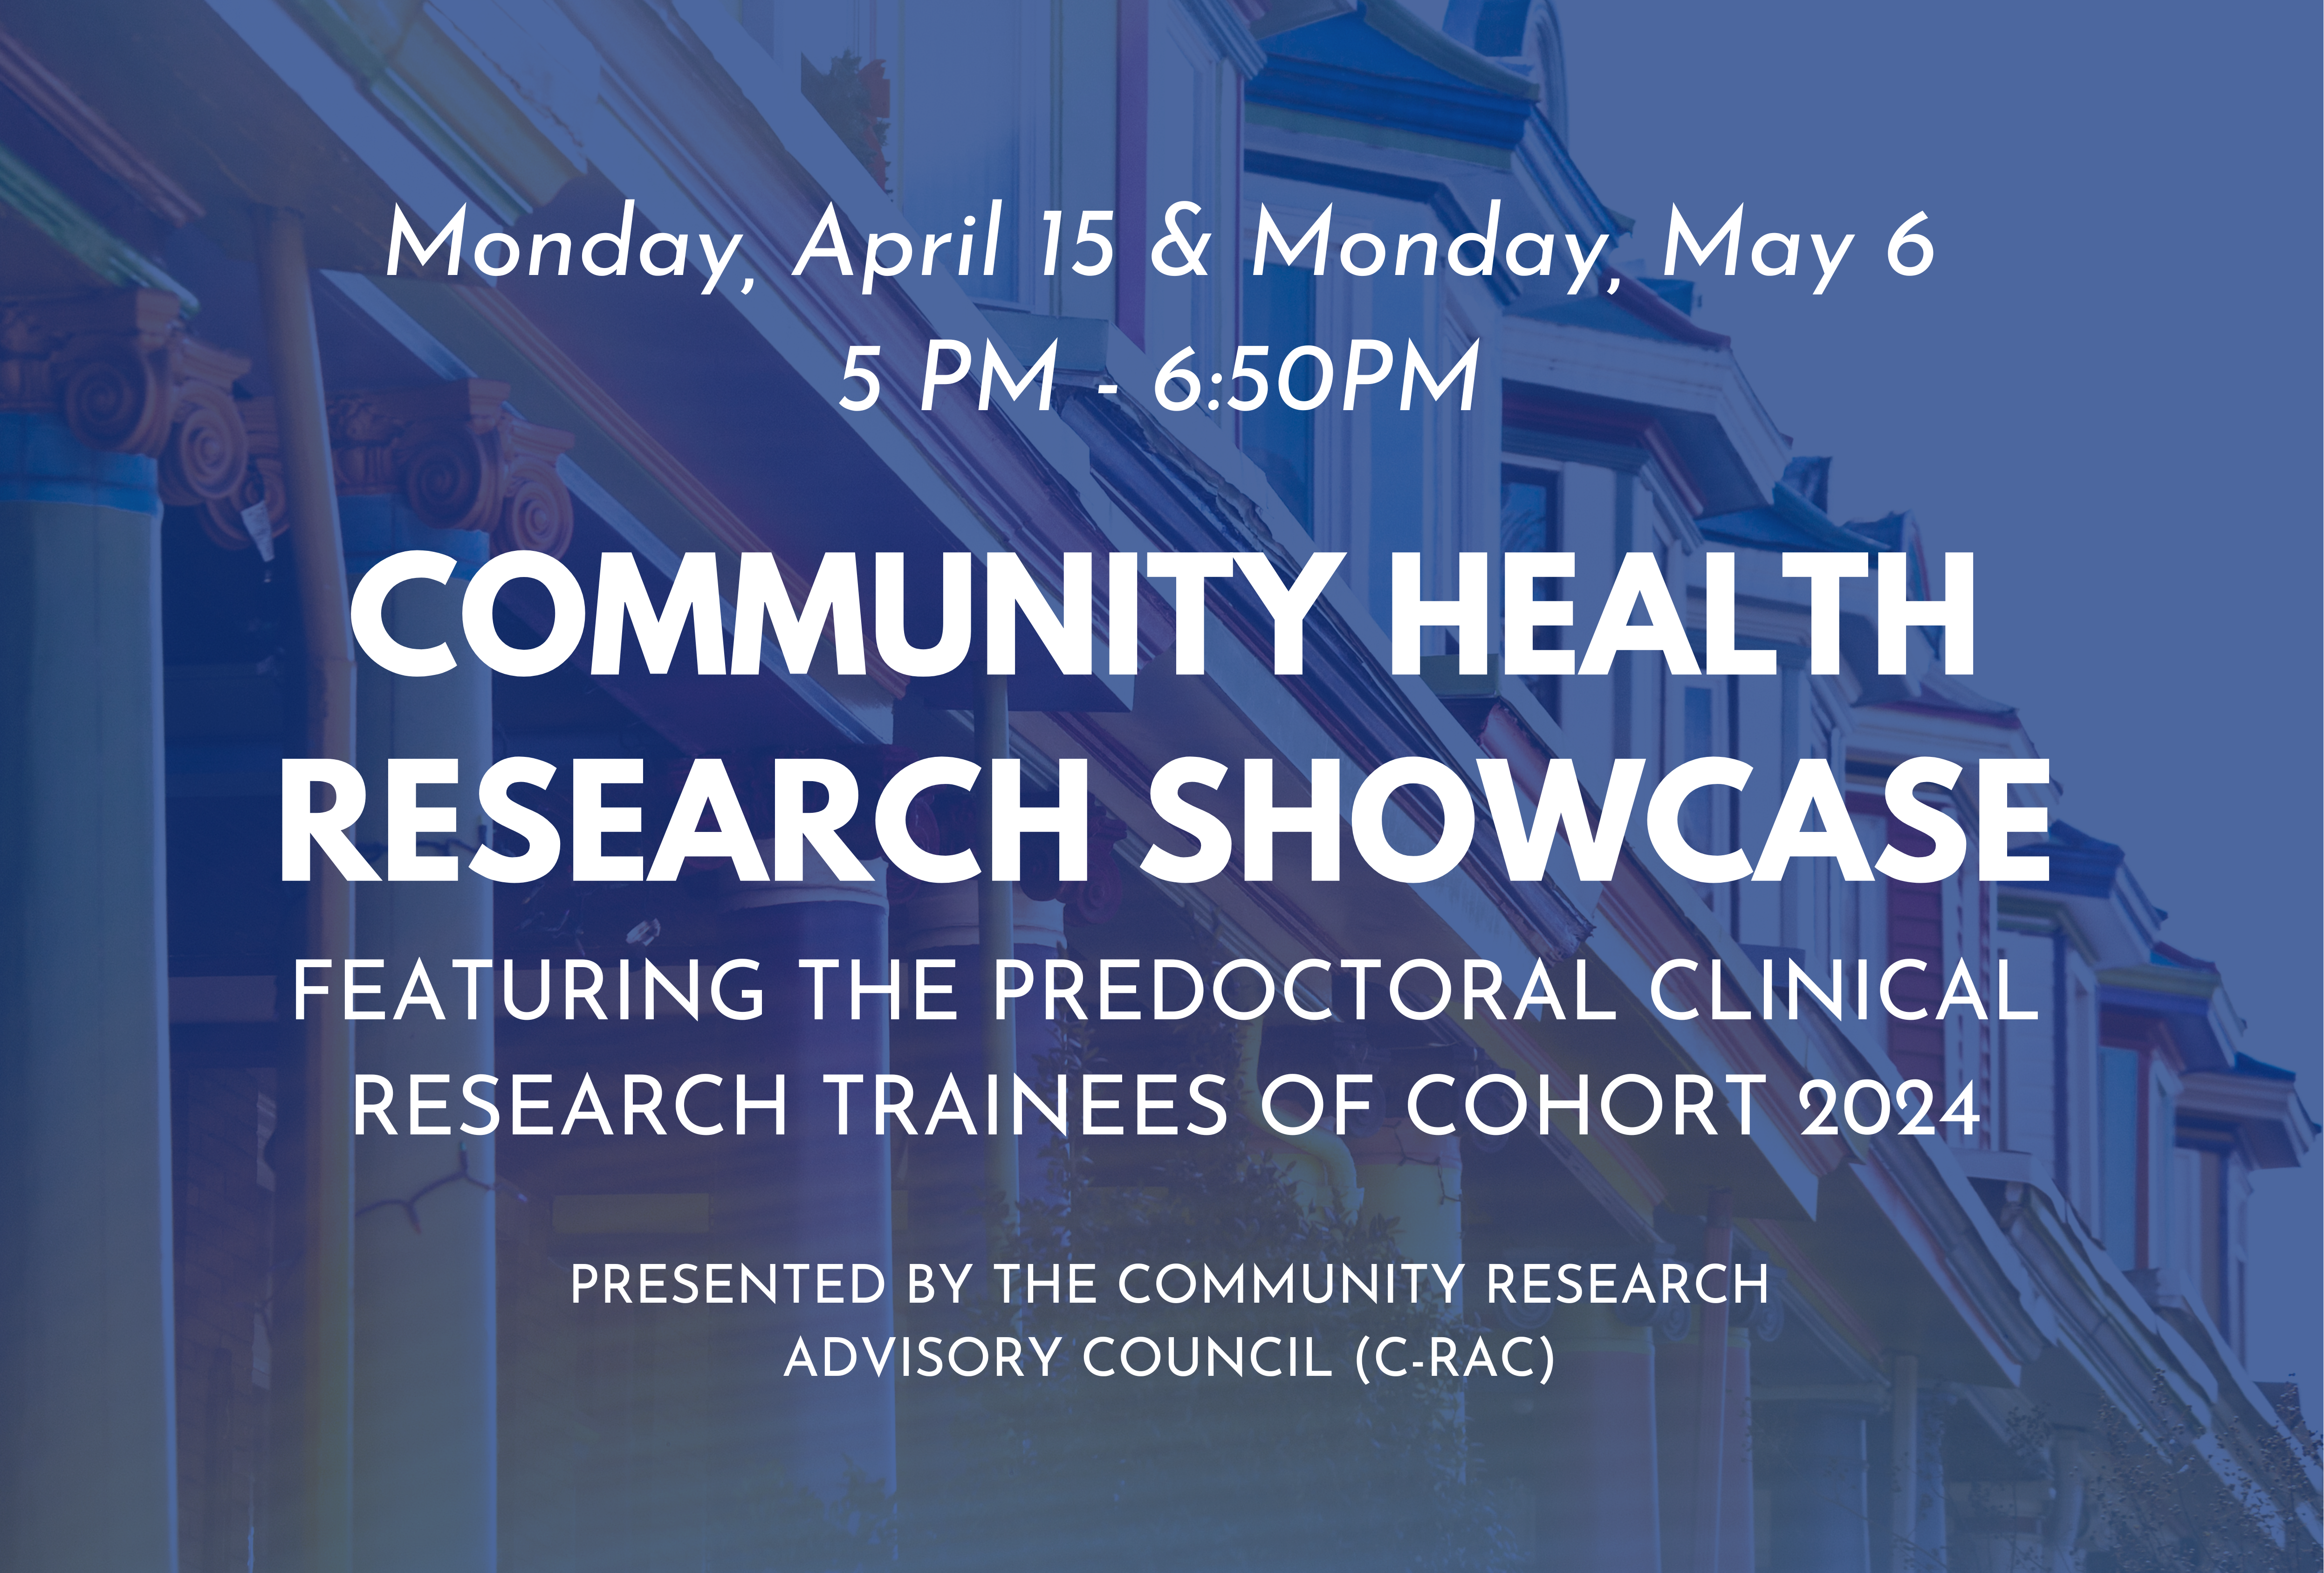 ICTR Community Health Research Showcase- April 15 and May 6